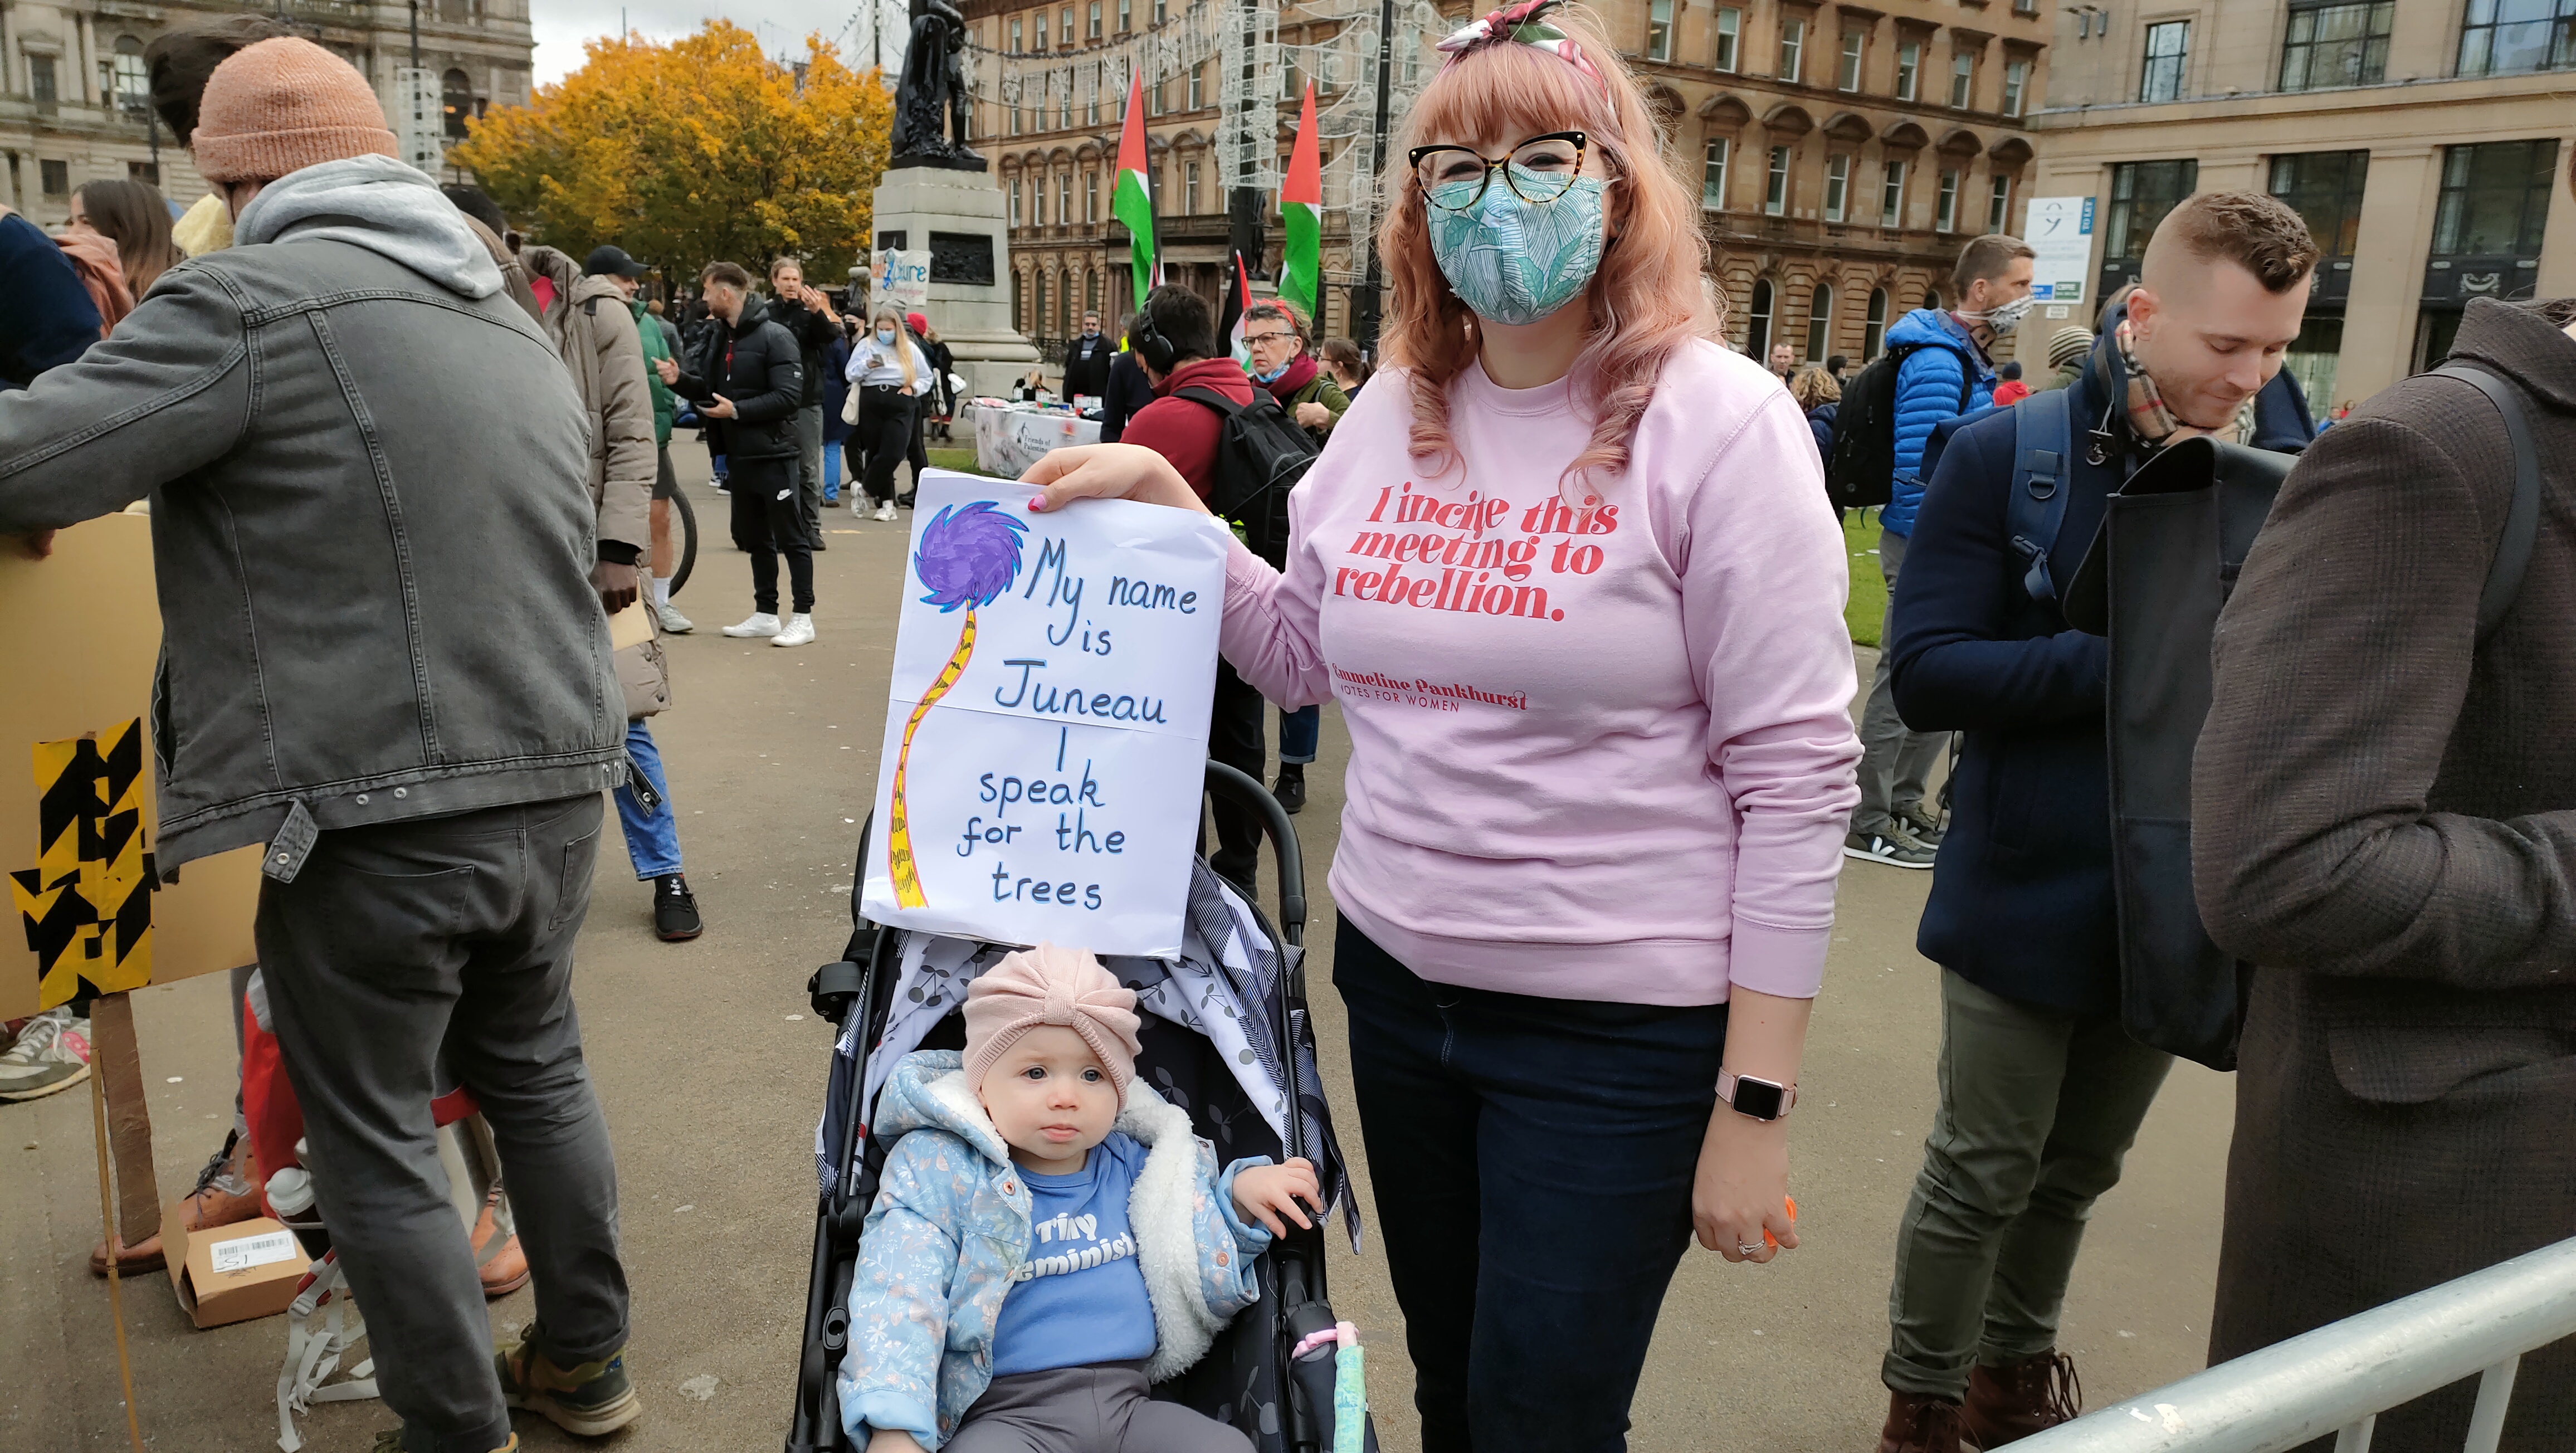 Climate activists, including hundreds of children, protest at George Square in Glasgow, demanding action on climate change from world leaders and politicians at COP26. Photo: Shamsuddin Illius 